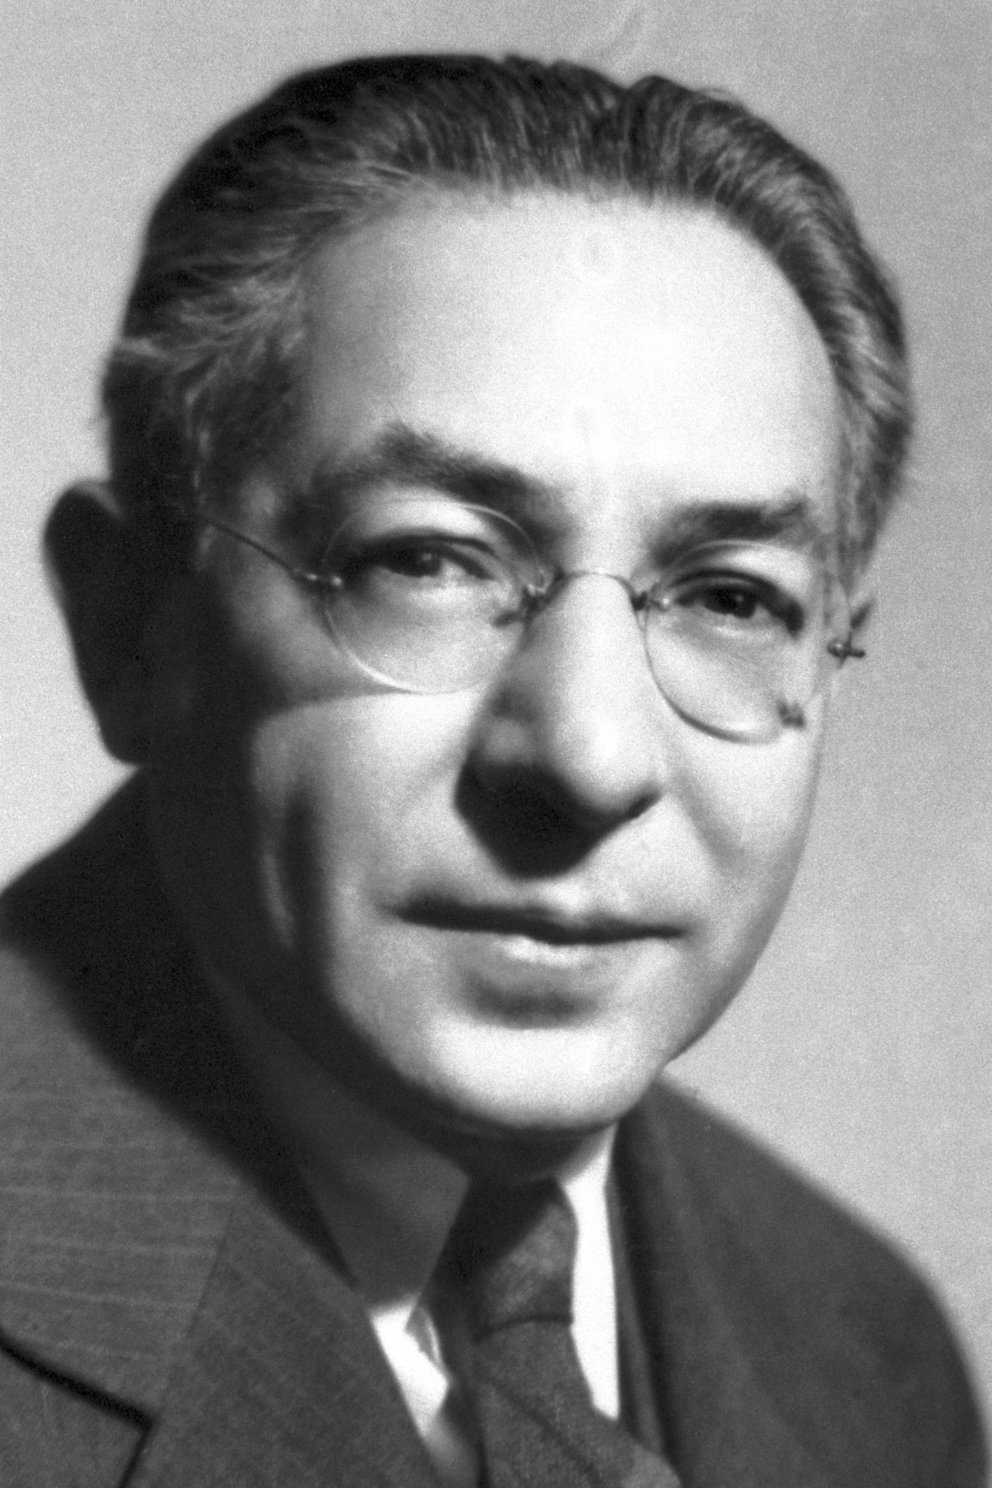 Head and shoulders of man in suit and tie wearing glasses